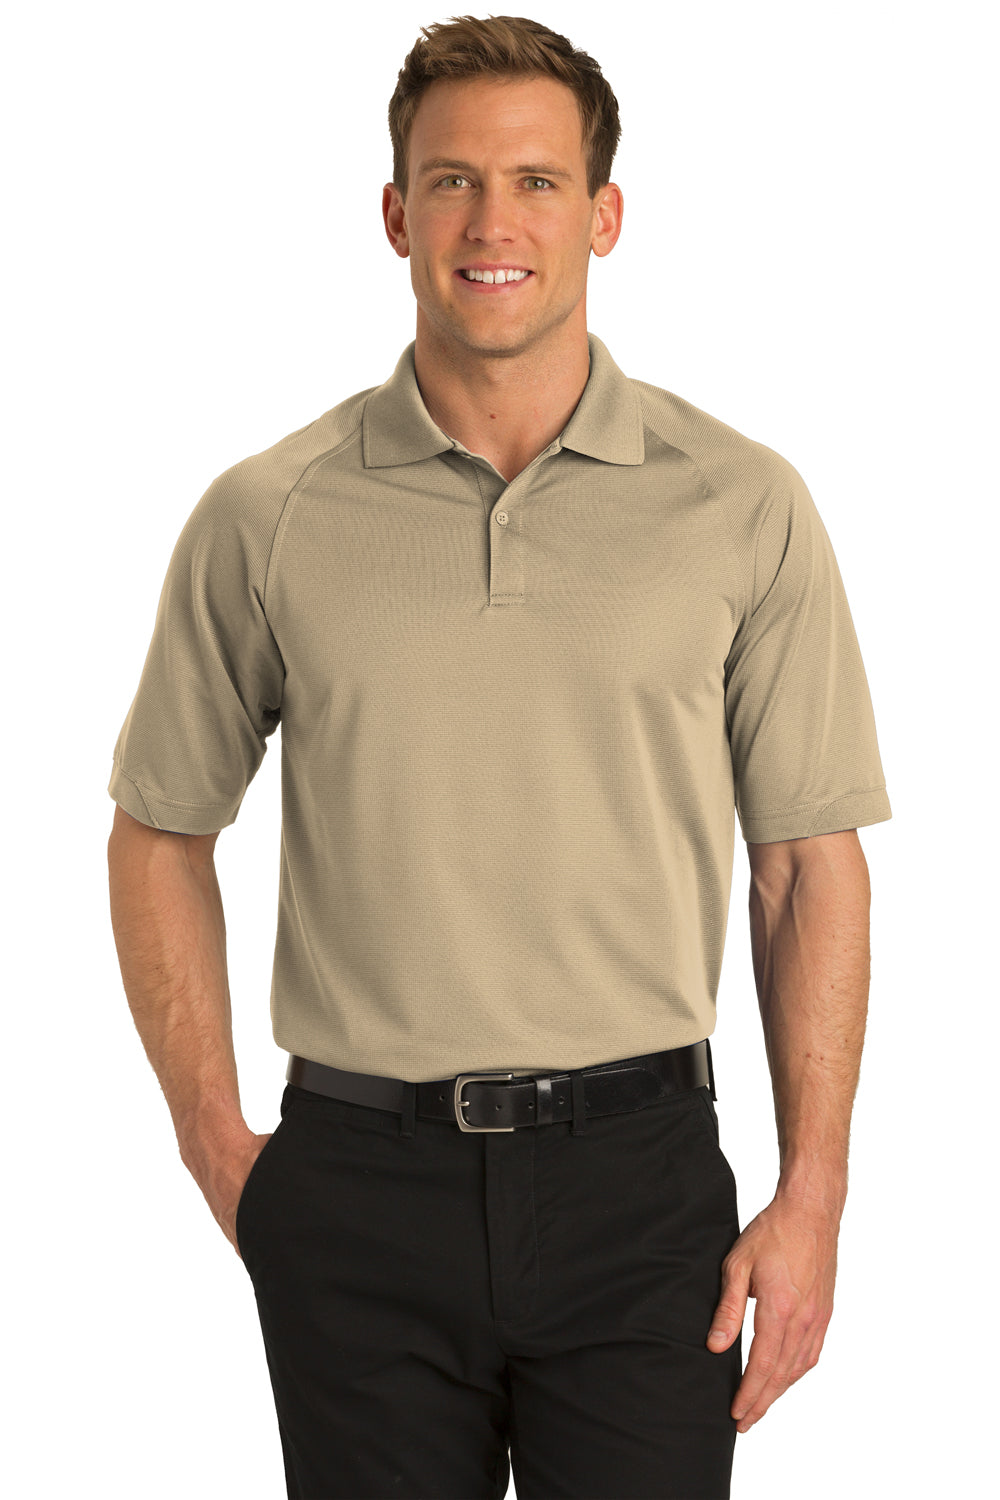 Port Authority K525 Mens Dry Zone Moisture Wicking Short Sleeve Polo Shirt Stone Brown Front